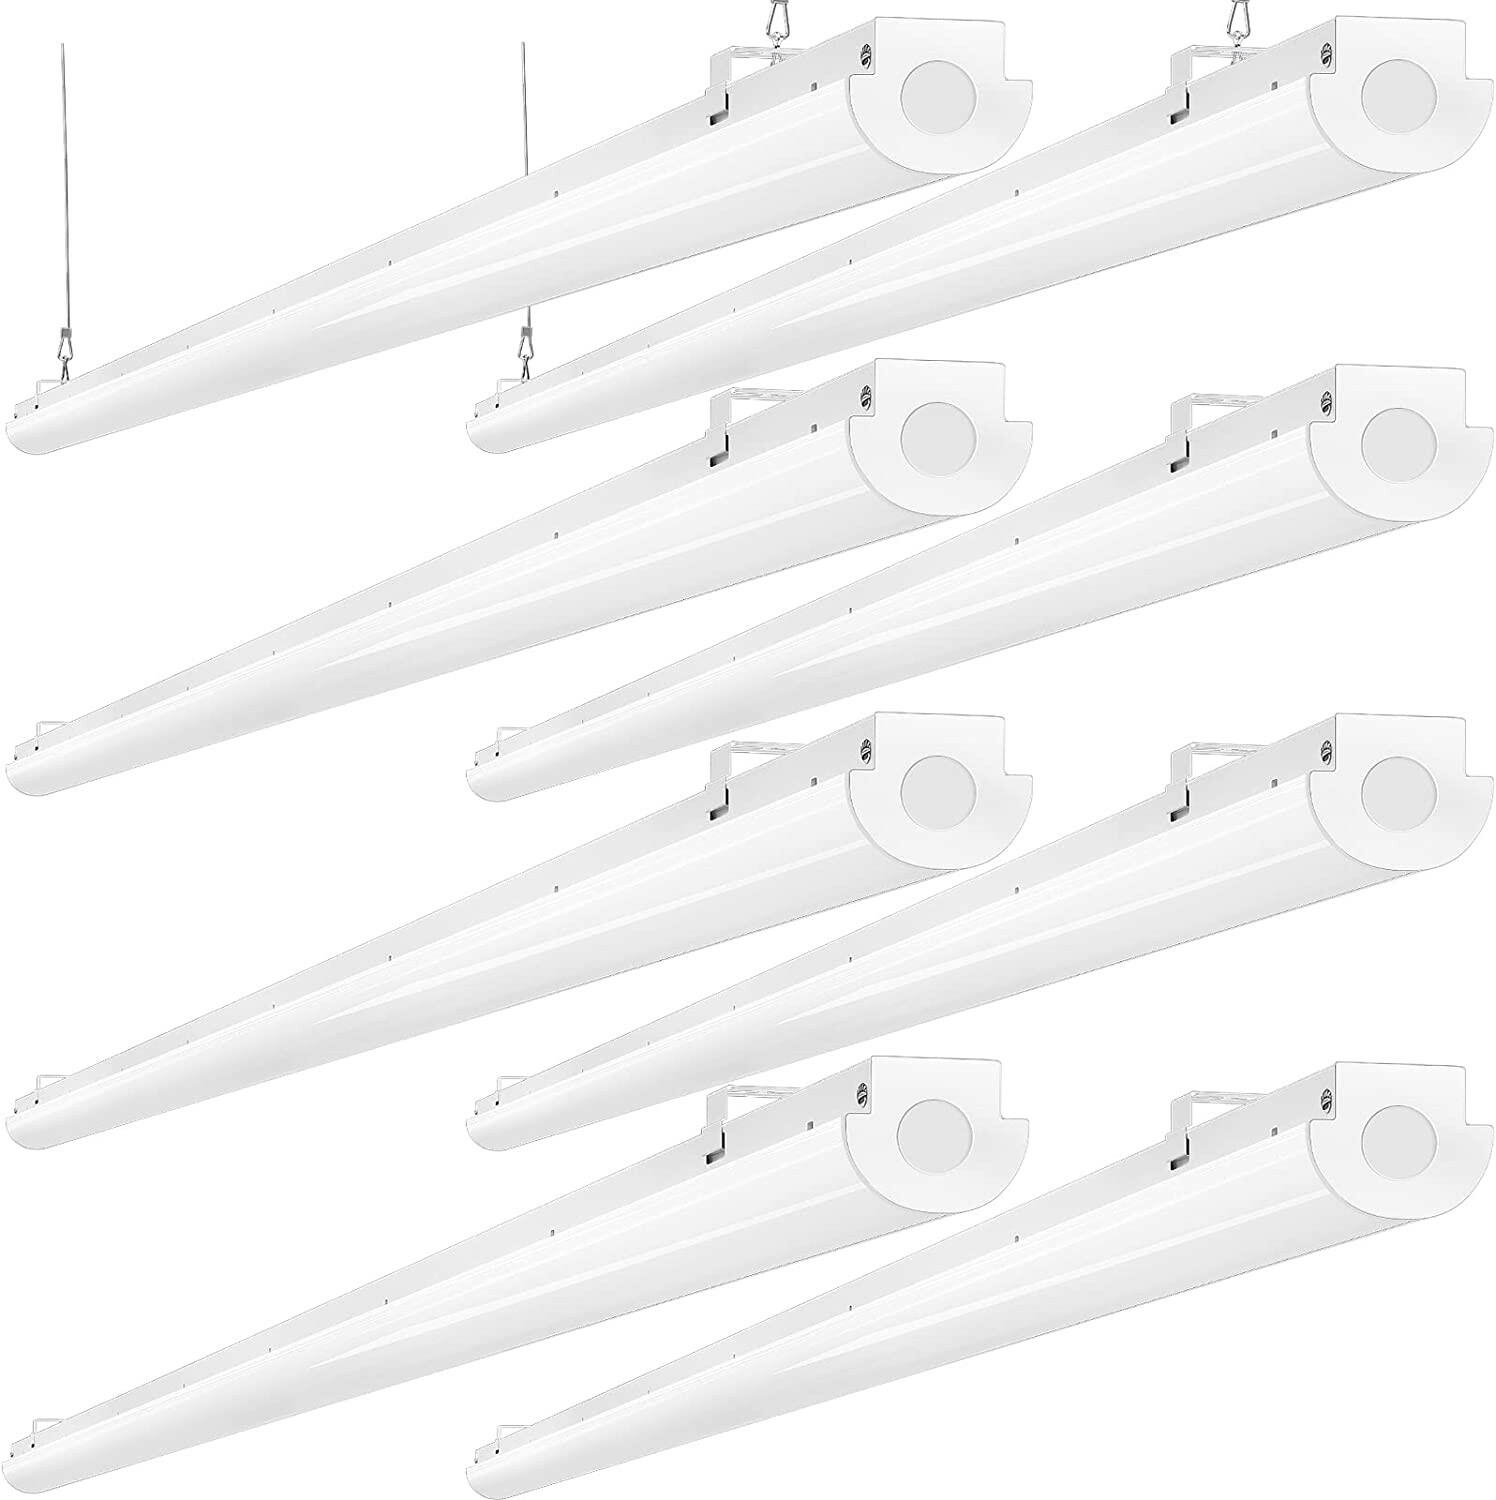 AntLux 8FT LED Shop Light, 110W LED Strip Light [6-lamp F32T8 Fluorescent Equiv.], Compact Commercial 8 Foot Ceiling Light Fixture for Warehouse, 12000LM, 5000K, Energy Saving up to 4000W / 5Y, 8 Pack